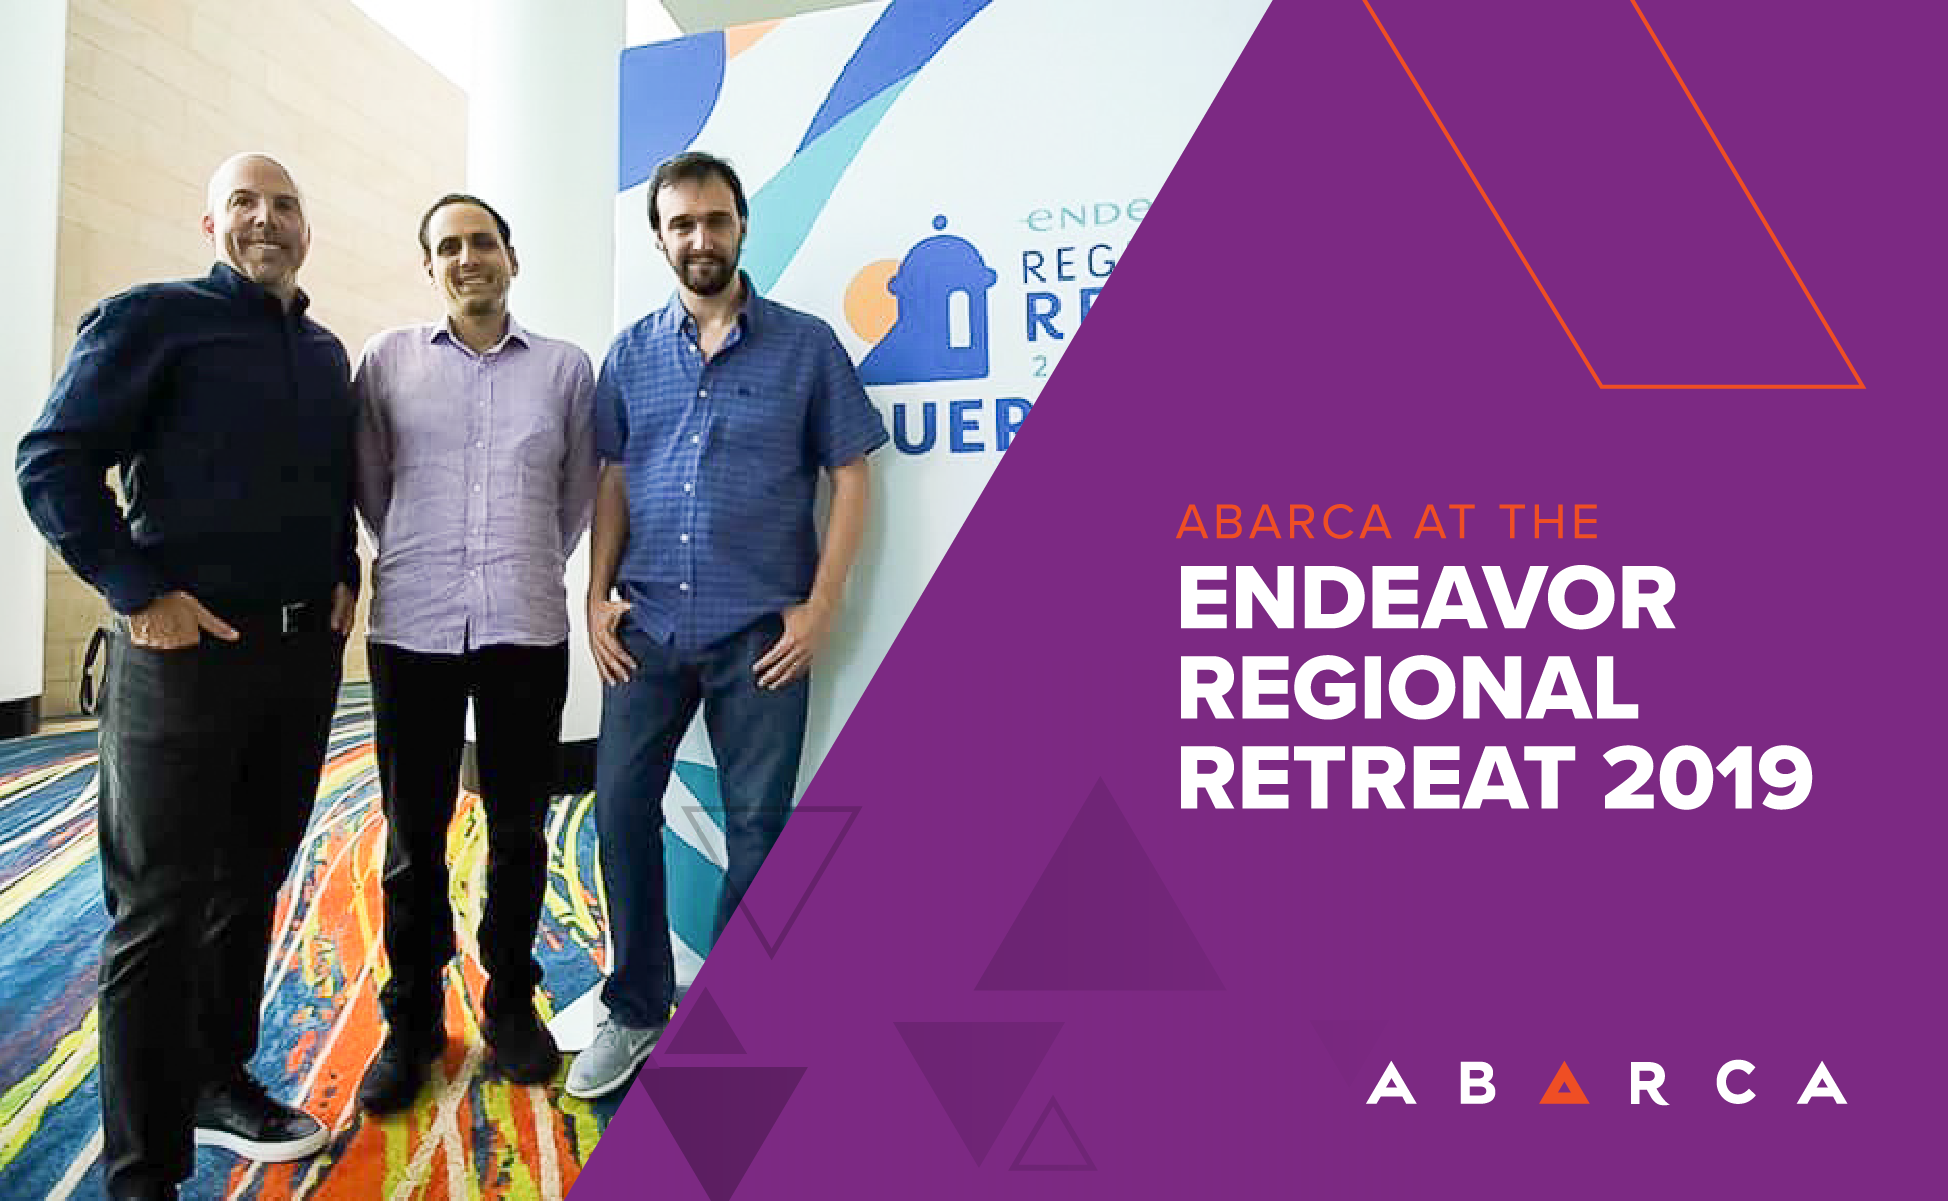 Abarca participated at the Endeavor Regional Retreat 2019